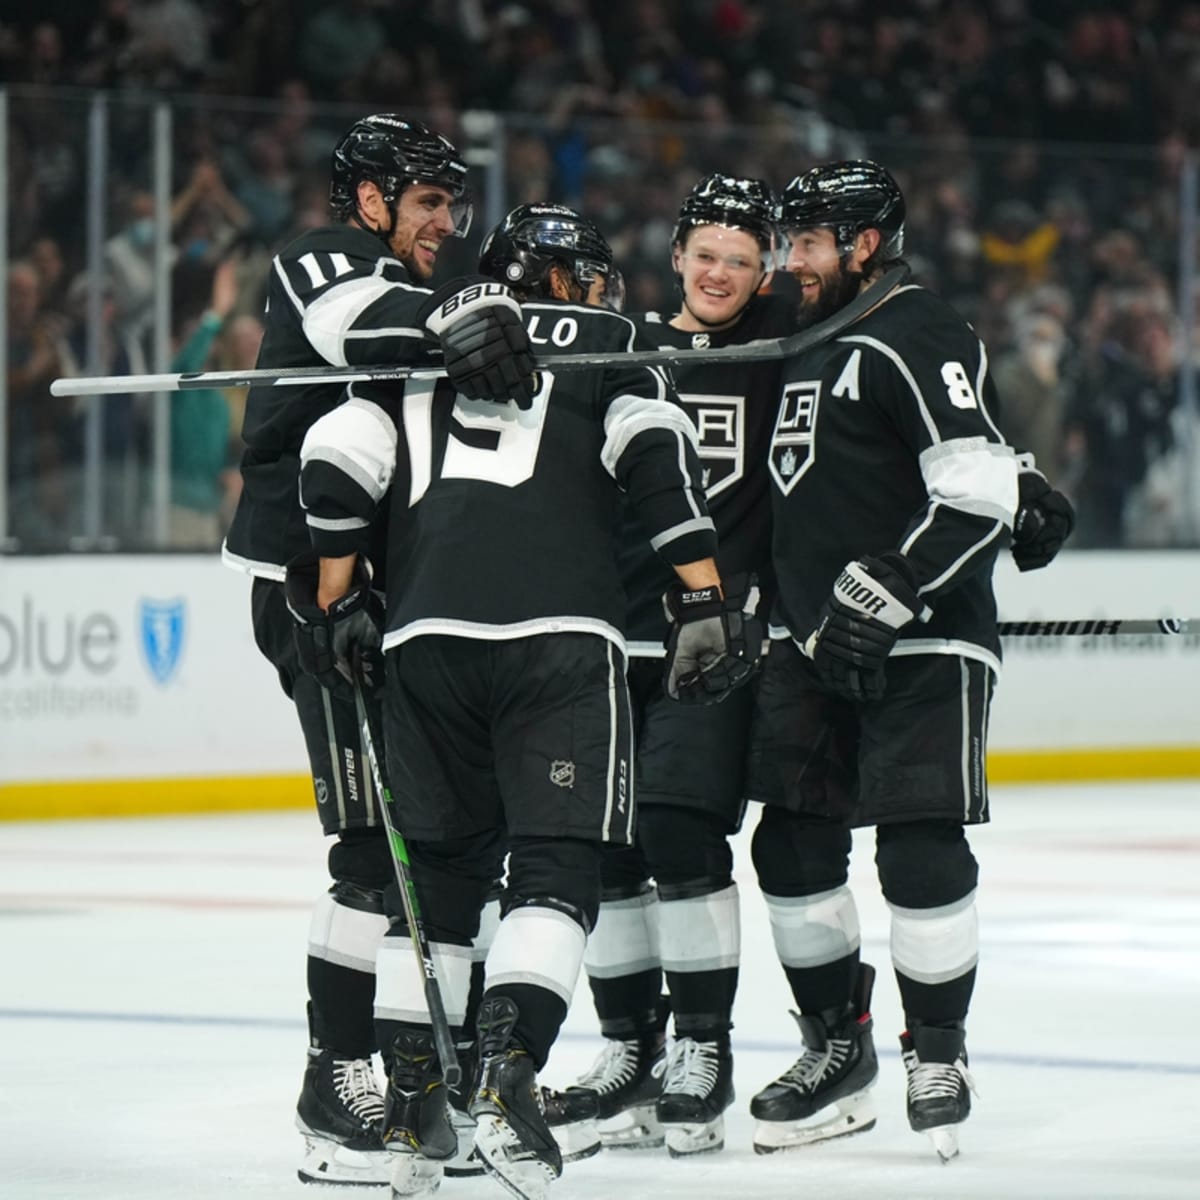 Watch LA Kings at Toronto Maple Leafs Stream NHL live, TV - How to Watch and Stream Major League and College Sports